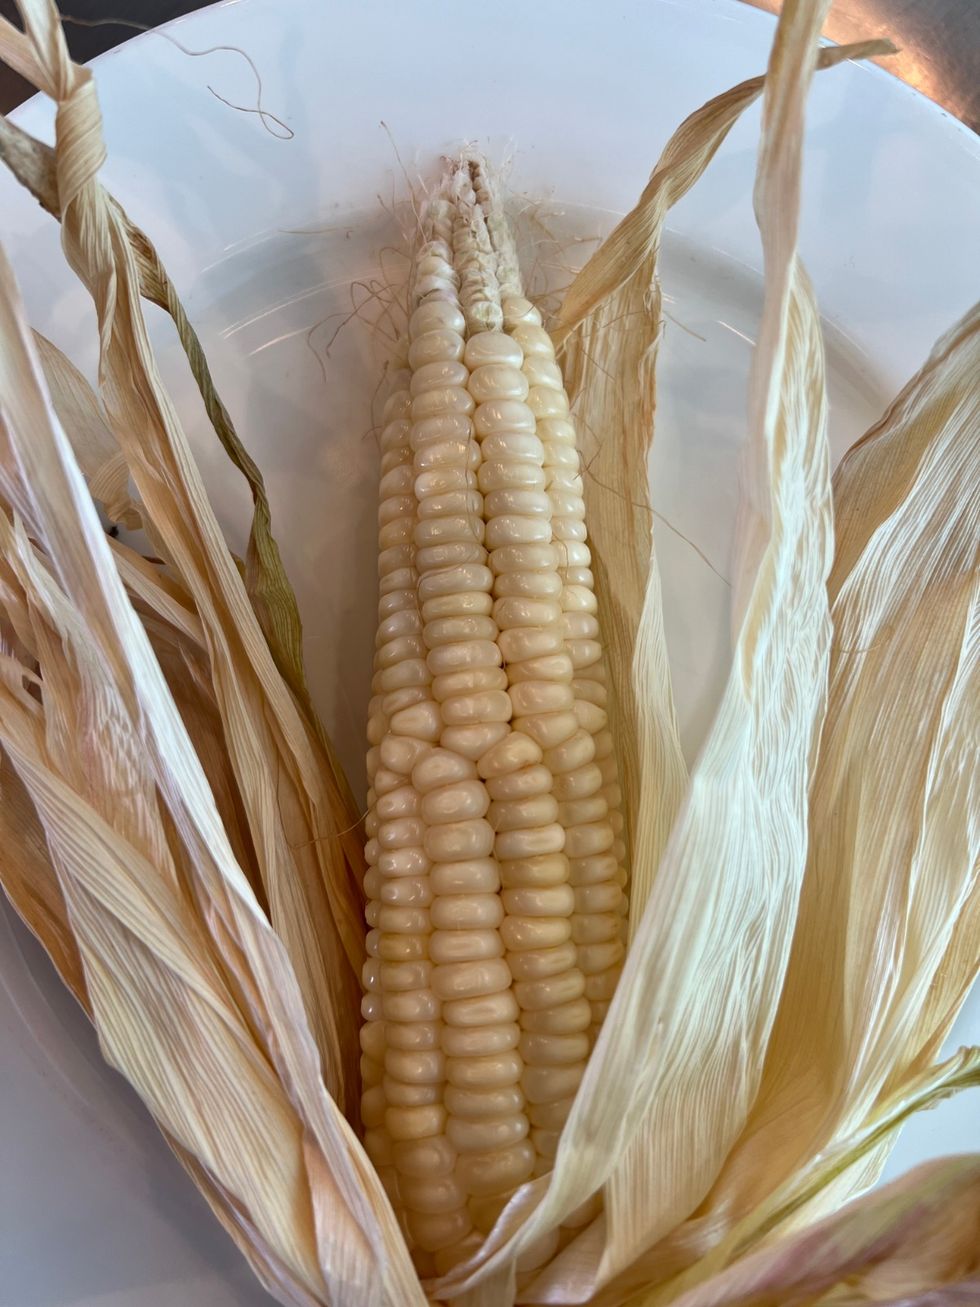 a close up of some corn